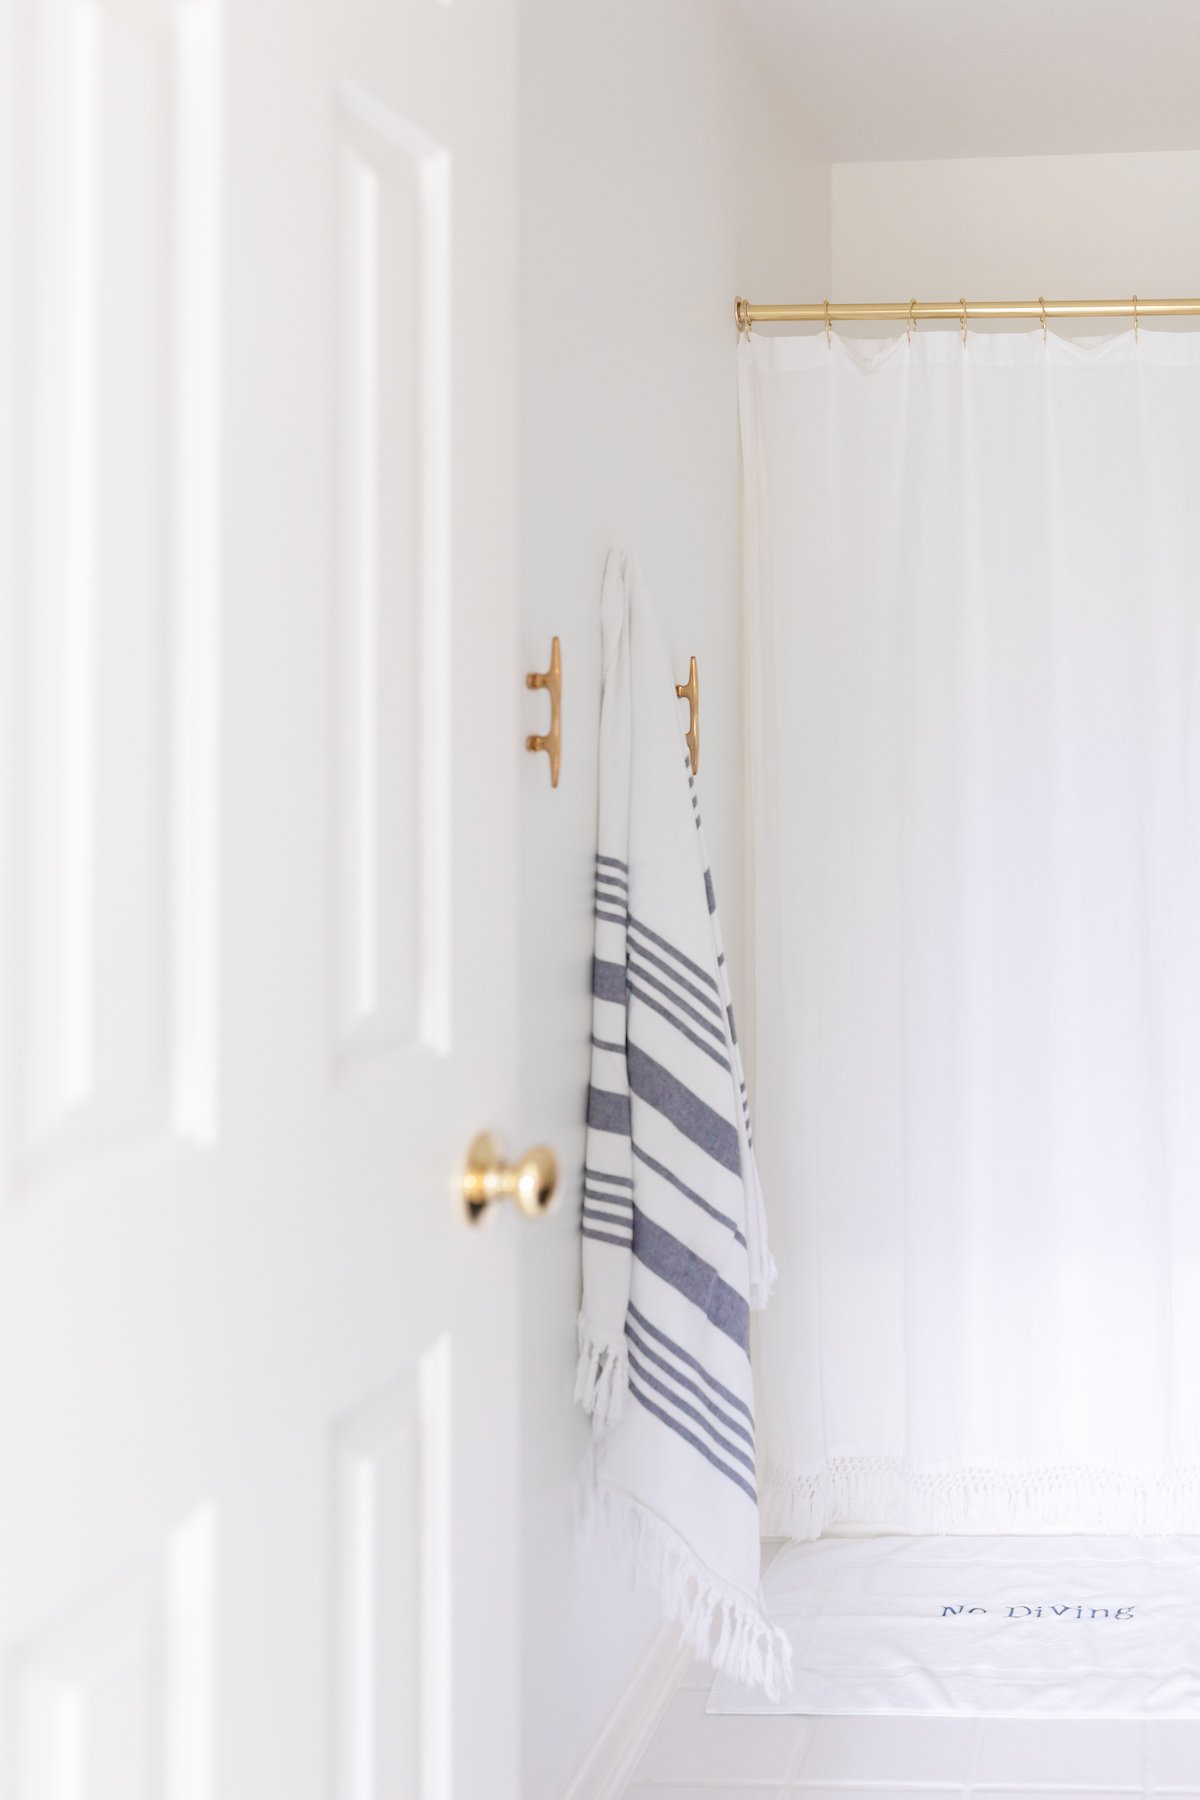 A white bathroom with a gold shower curtain rod with a white tasseled curtain.